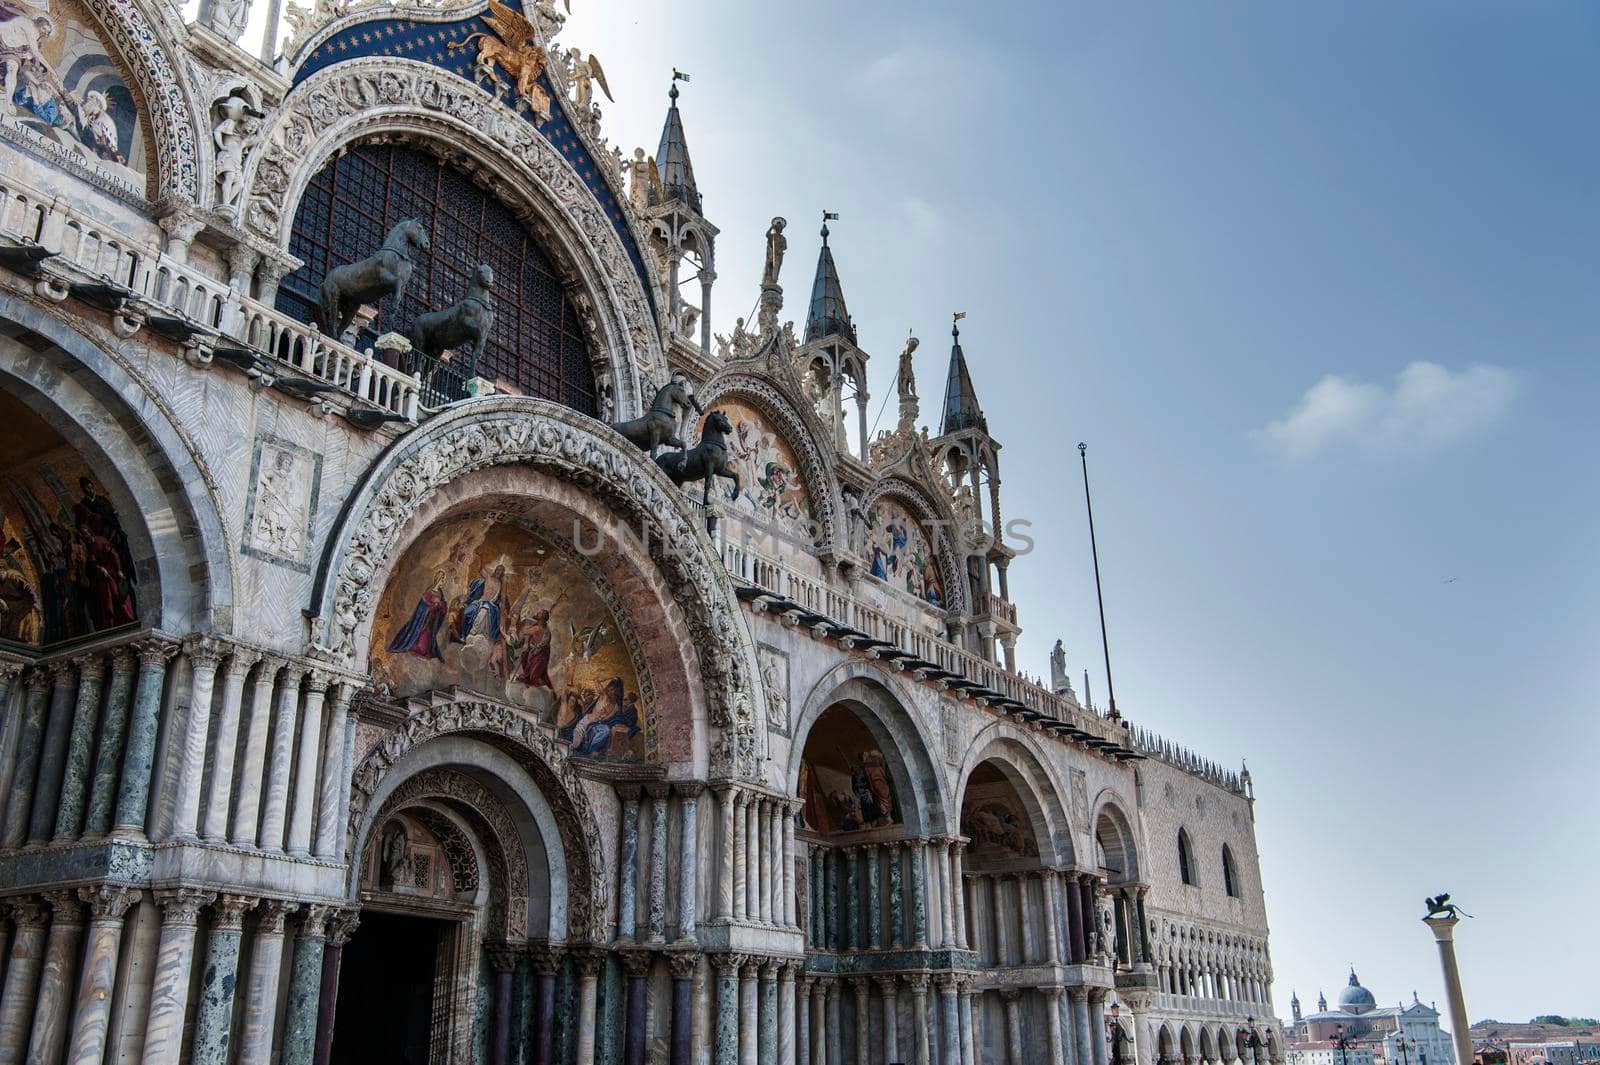 Detail of the facade of the Basilica of San Marco in Venice